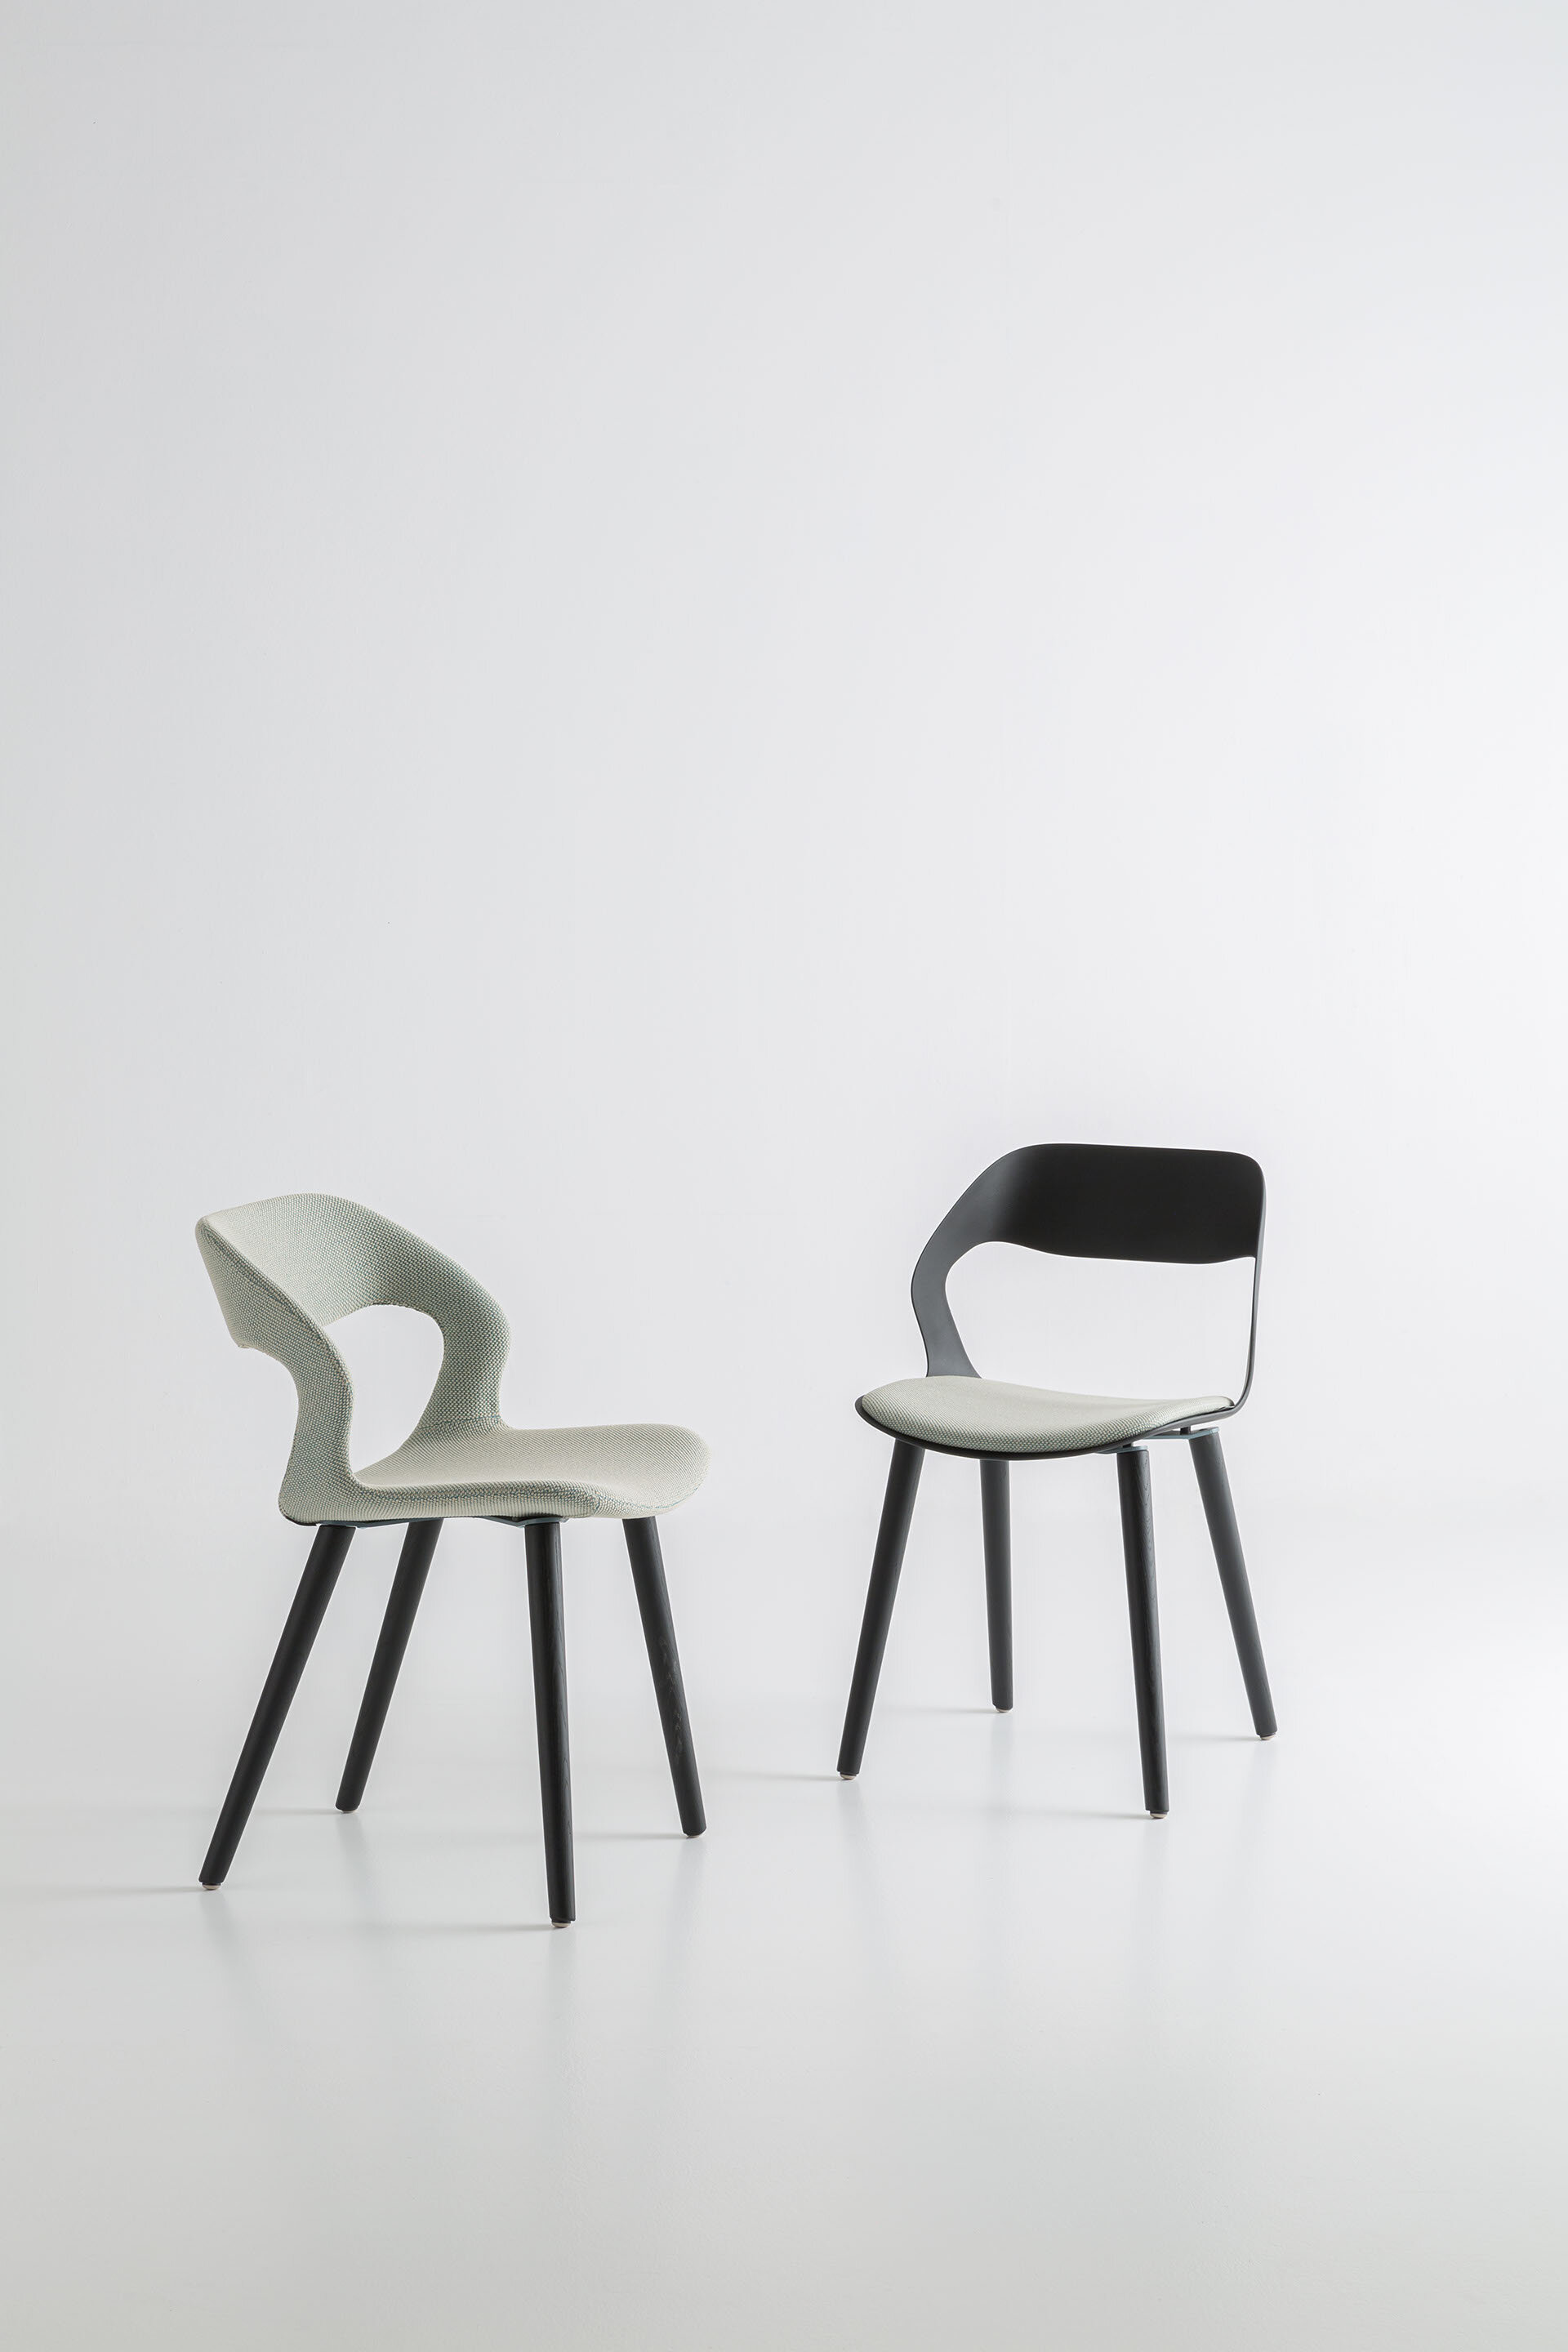 Crassevig_Mixis Air R_4W Fully and Seat upholstered_001.jpeg